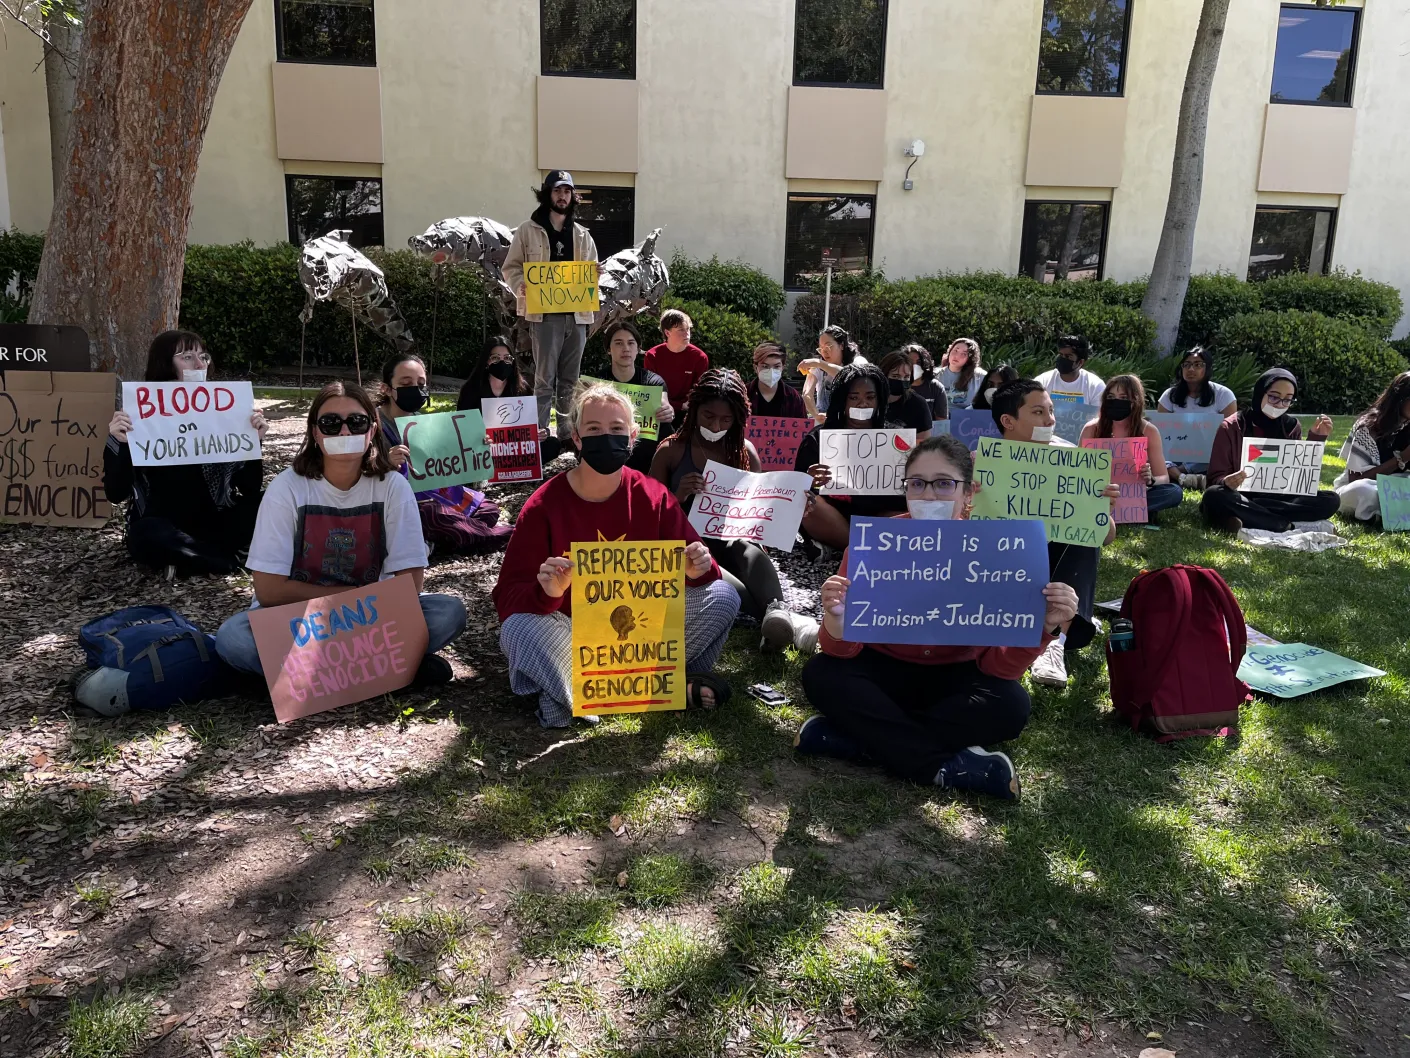 A similar group of protesters sitting outside the Center of Student Services, holding signs reading “Deans: Denounce Genocide,” “Represent Our Voices: Denounce Genocide,” “Israel is an Apartheid State. Zionism doesn’t equal Judaism,” and more